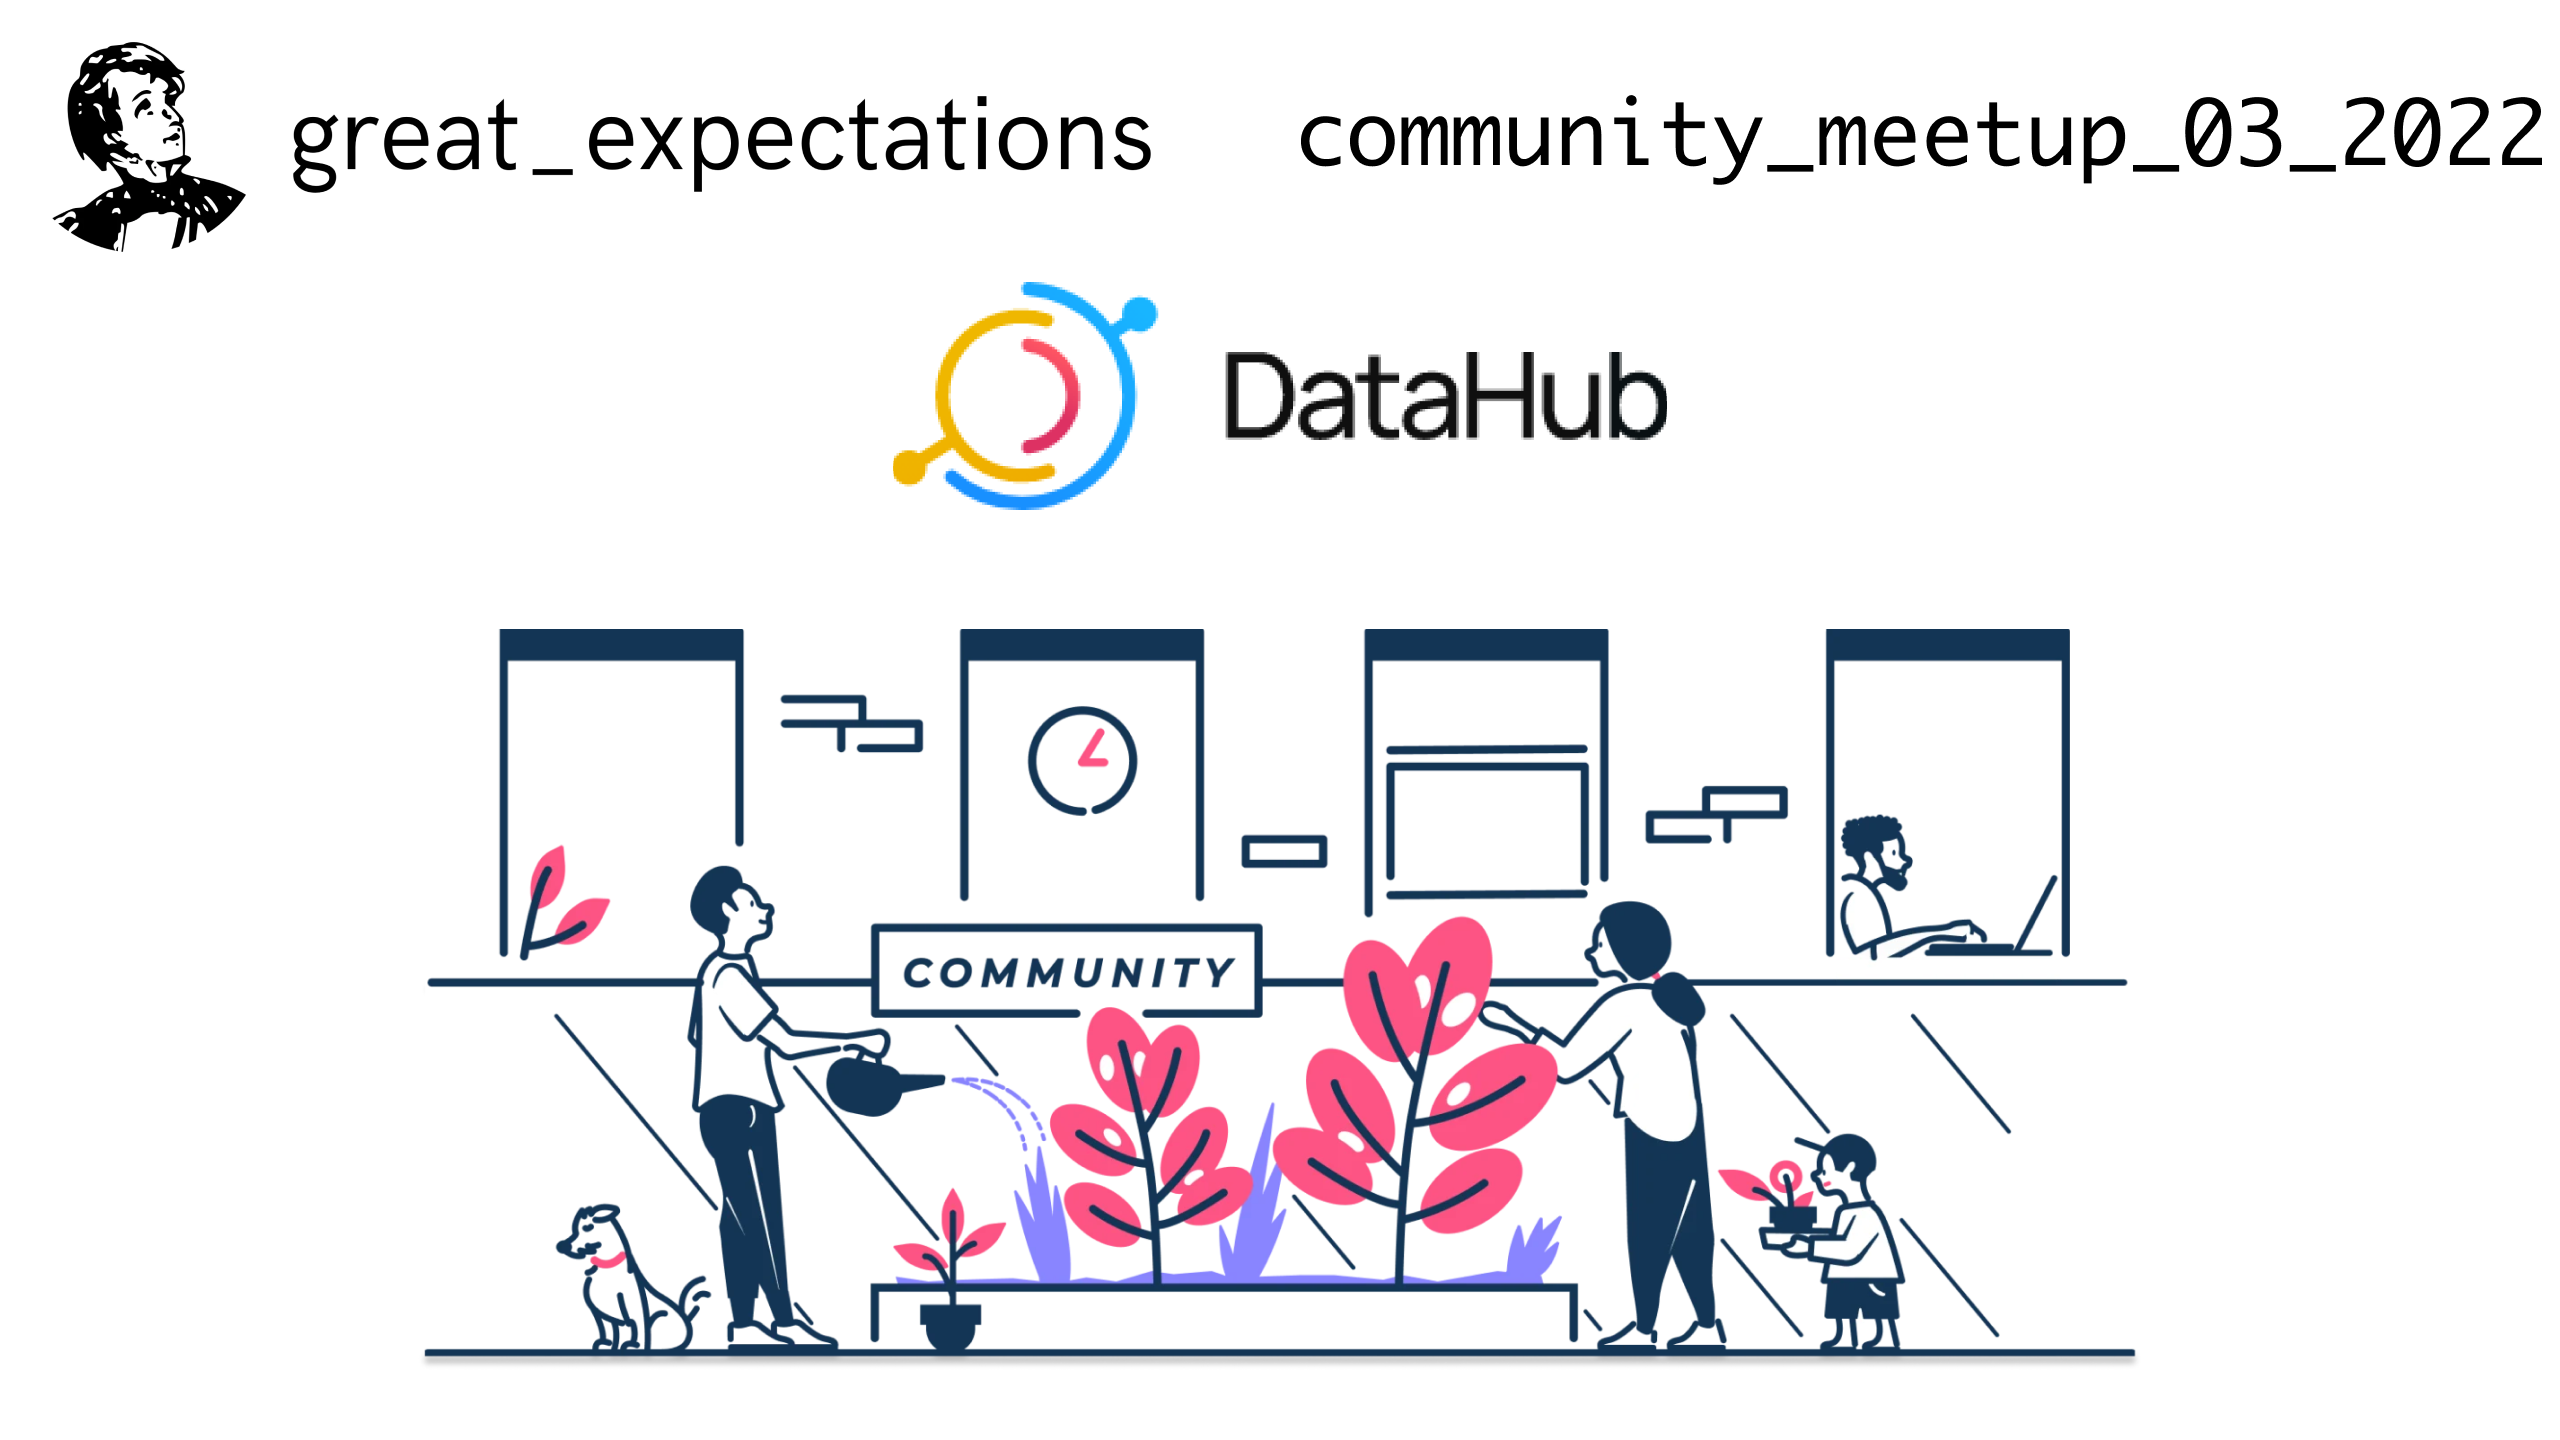 great expectation community event cover with DataHub